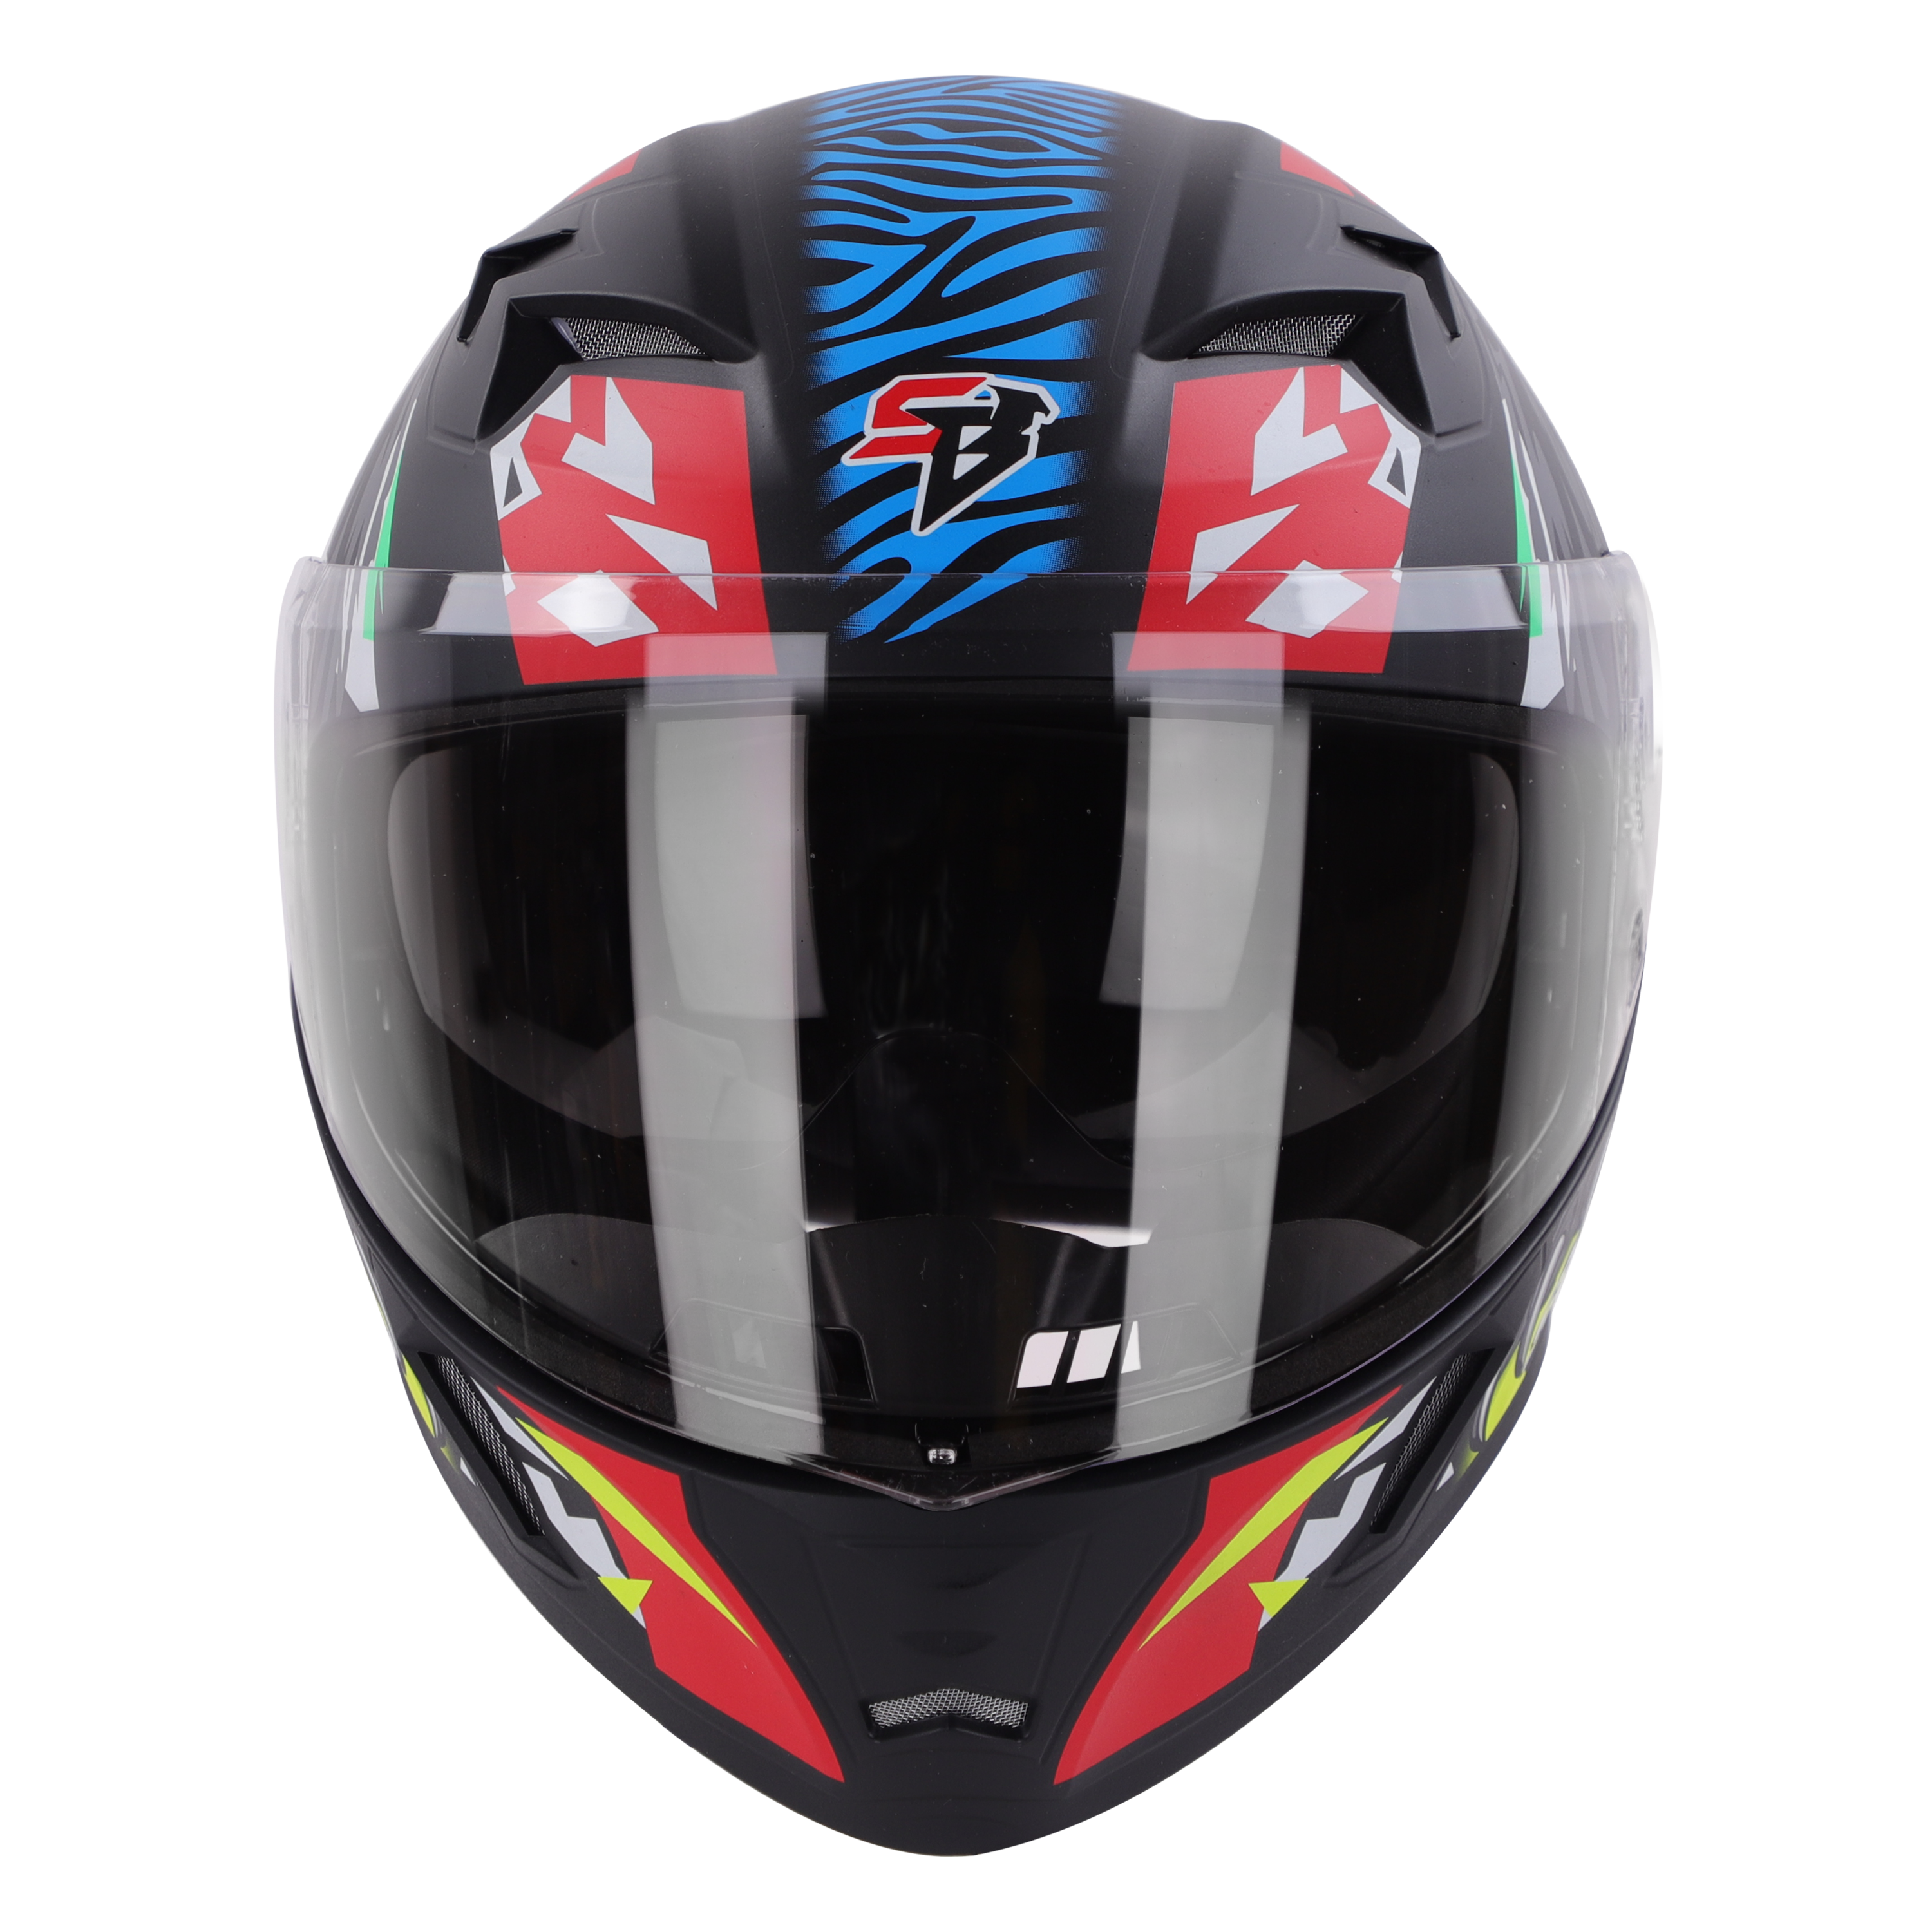 SBA-21 PANTHA GLOSSY BLACK WITH RED/NEON (WITH INNER SUN SHIELD & HIGH-END INTERIOR)